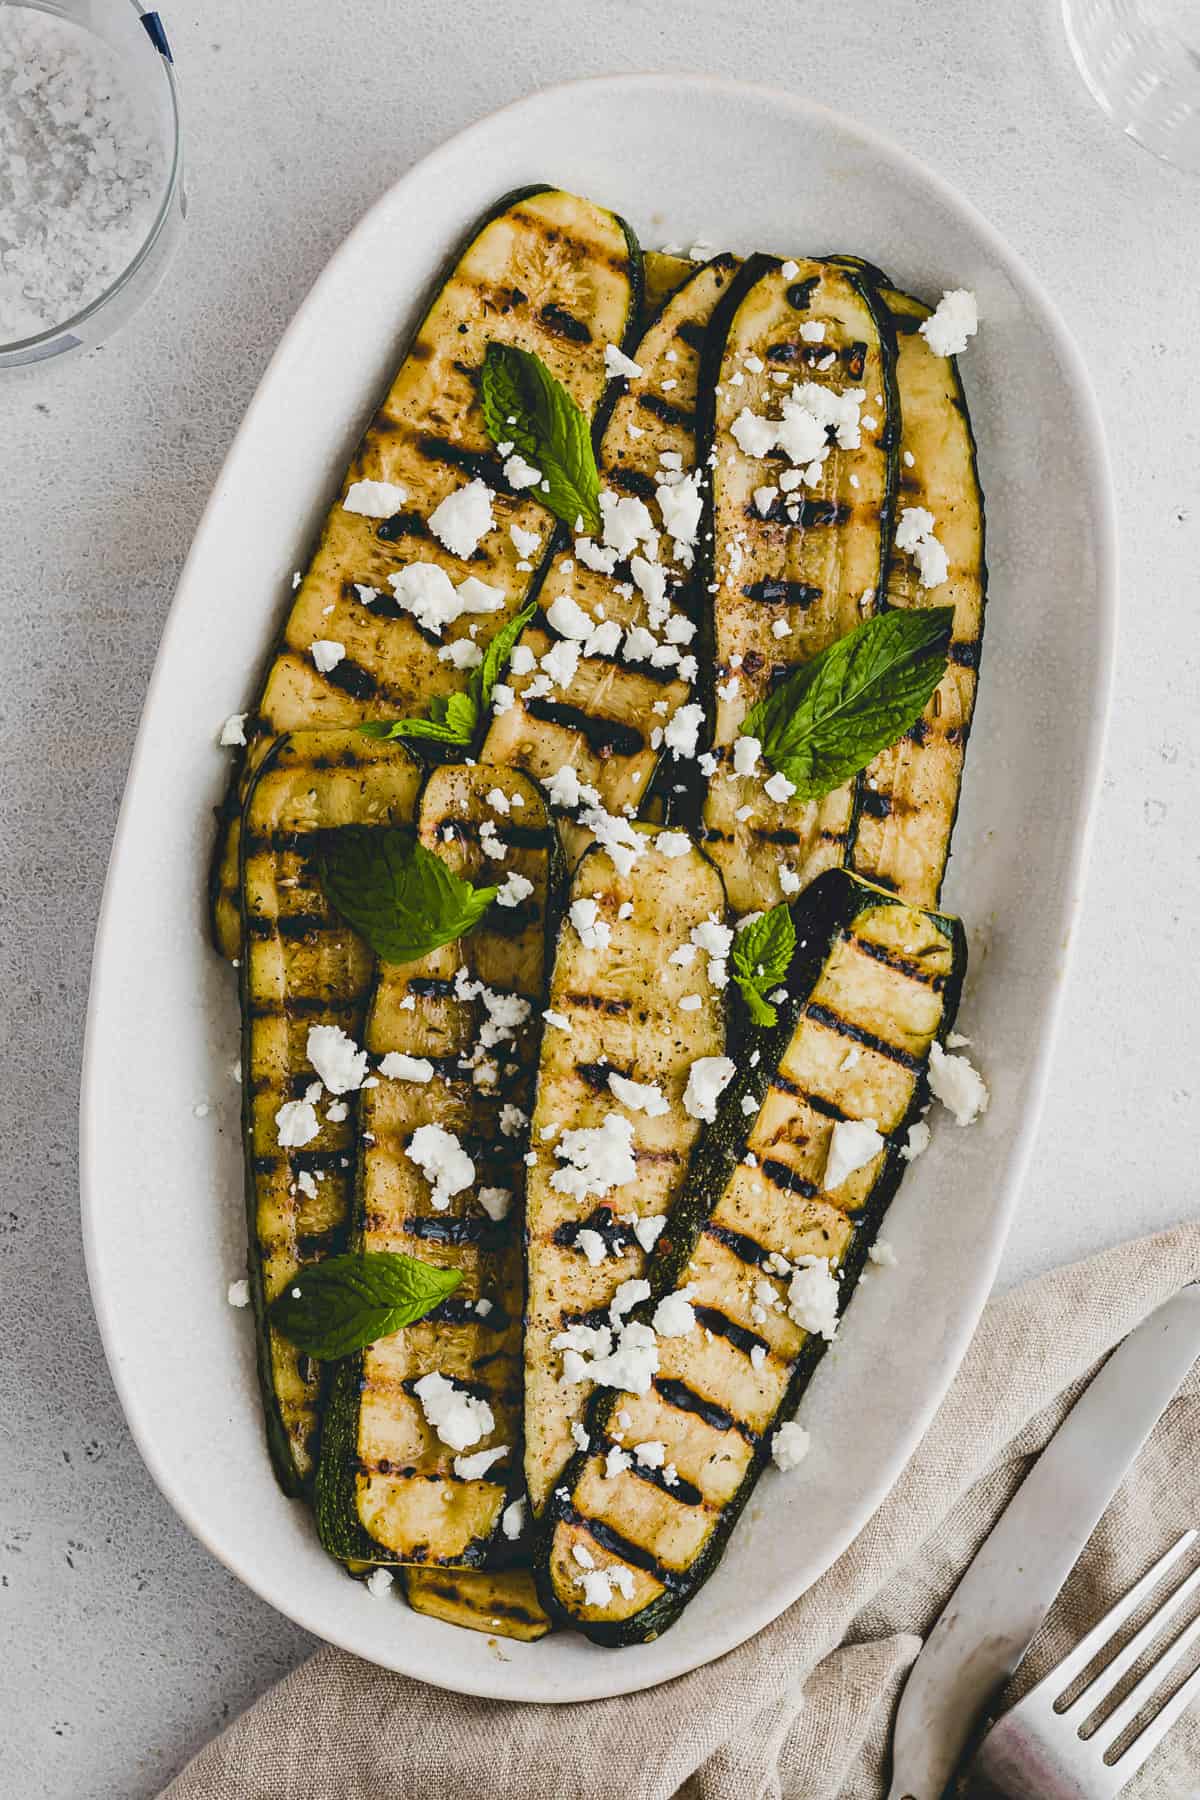 Top view of grilled slices of zucchini in a single layer on a white oval plate garnished with crumbled feta cheese and mint leaves. 